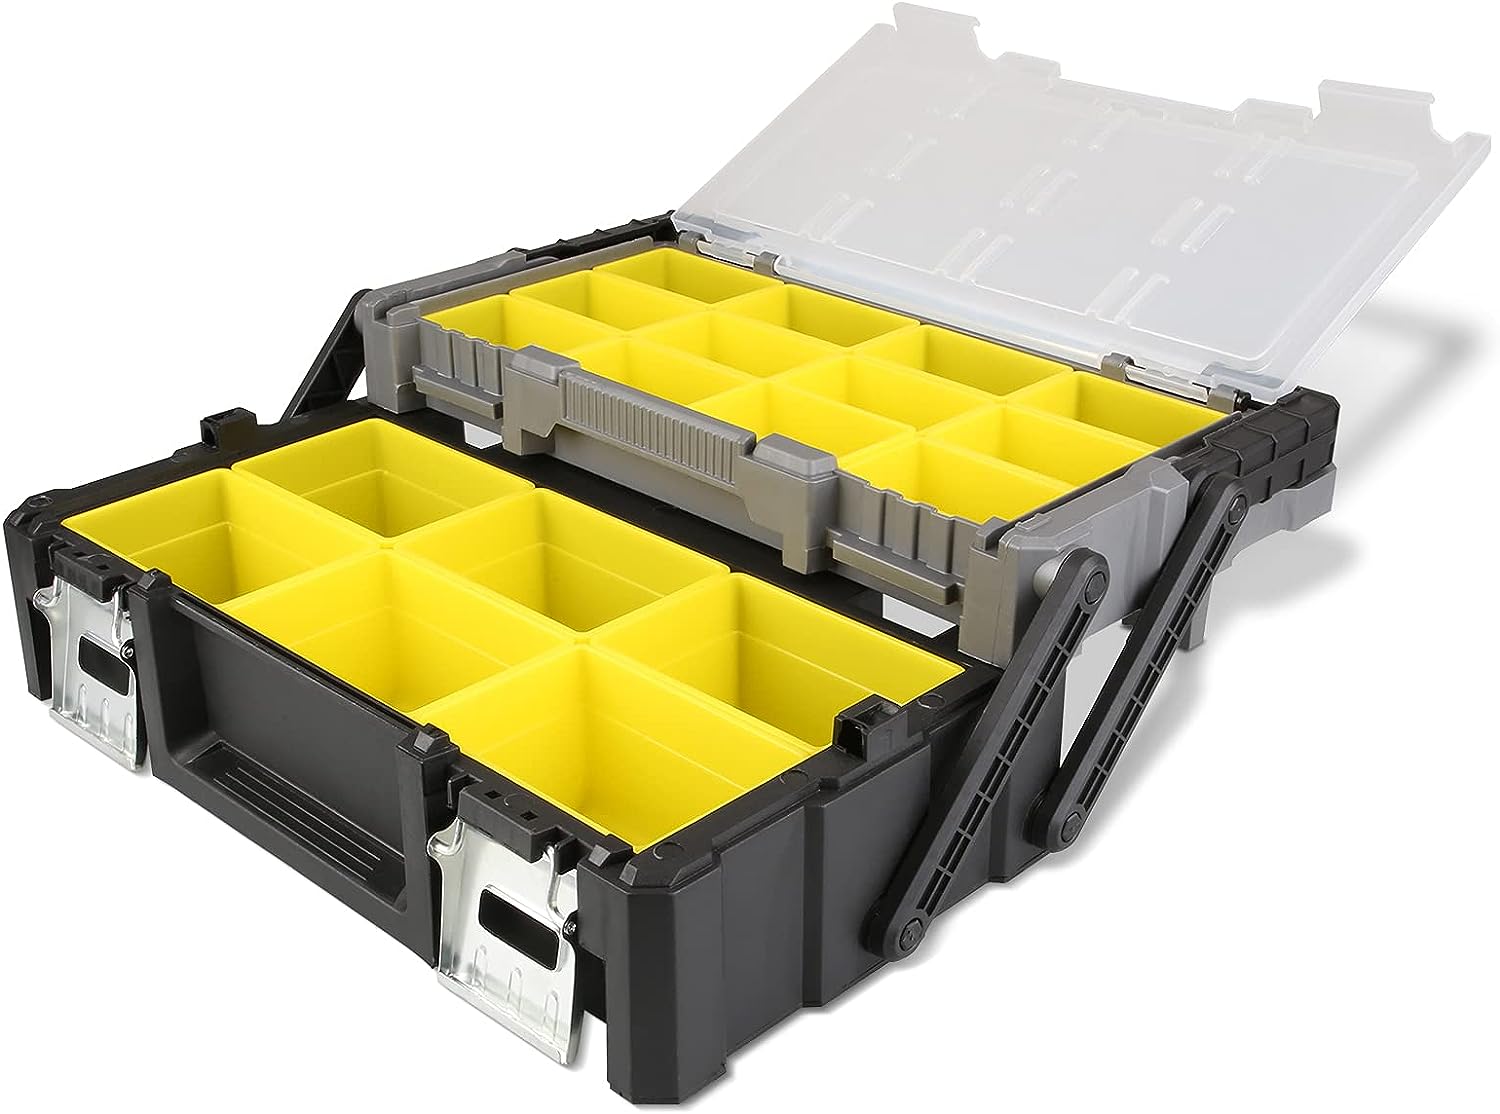 https://bigbigmart.com/wp-content/uploads/2023/10/Olympia-Tools-18-Inch-Portable-Plastic-Cantilever-Tool-Box-Organizer-with-Removable-Compartments-Great-Organization-and-Storage-for-Hardware-Assorted-Nails-Dowels-Washers-Screws-Nuts-and-Bolts.jpg